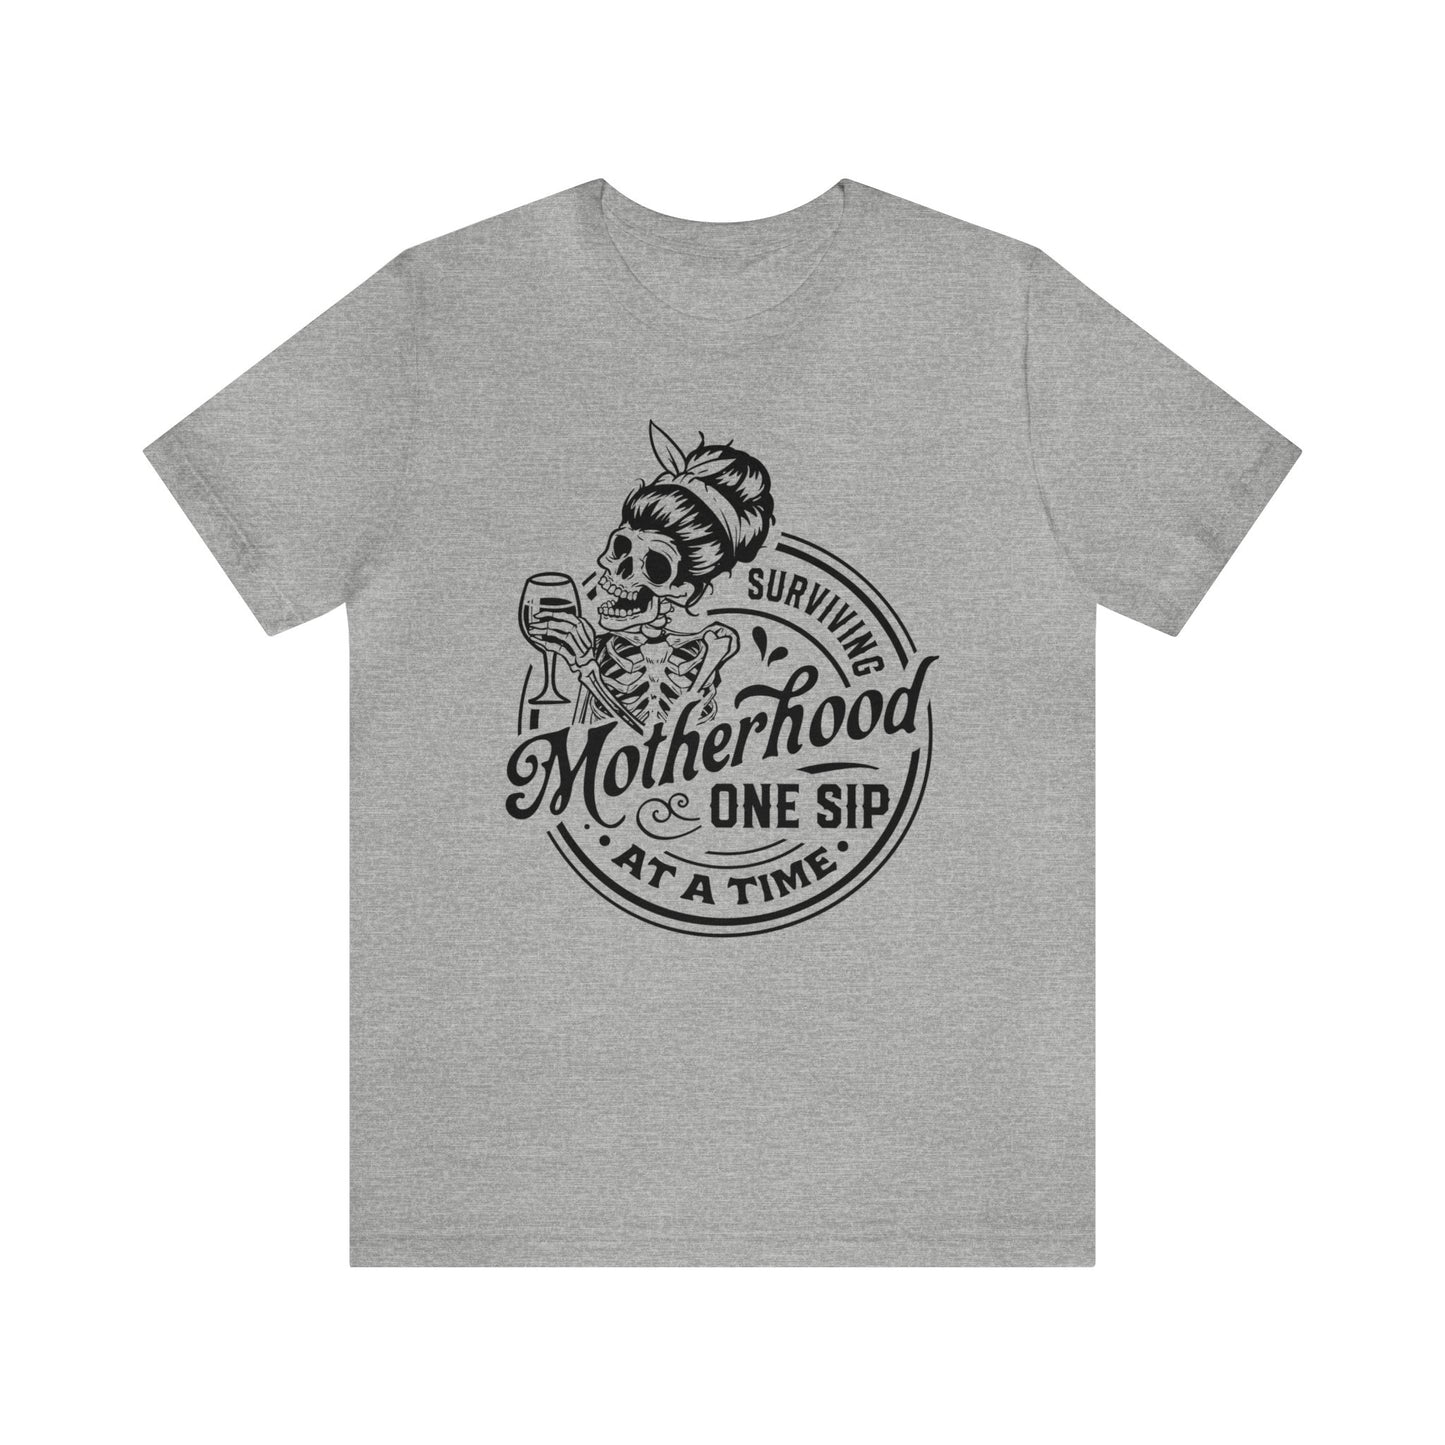 Surviving Motherhood T-Shirt For Mother's Day T Shirt For Mom TShirt For Wine Lovers Gift